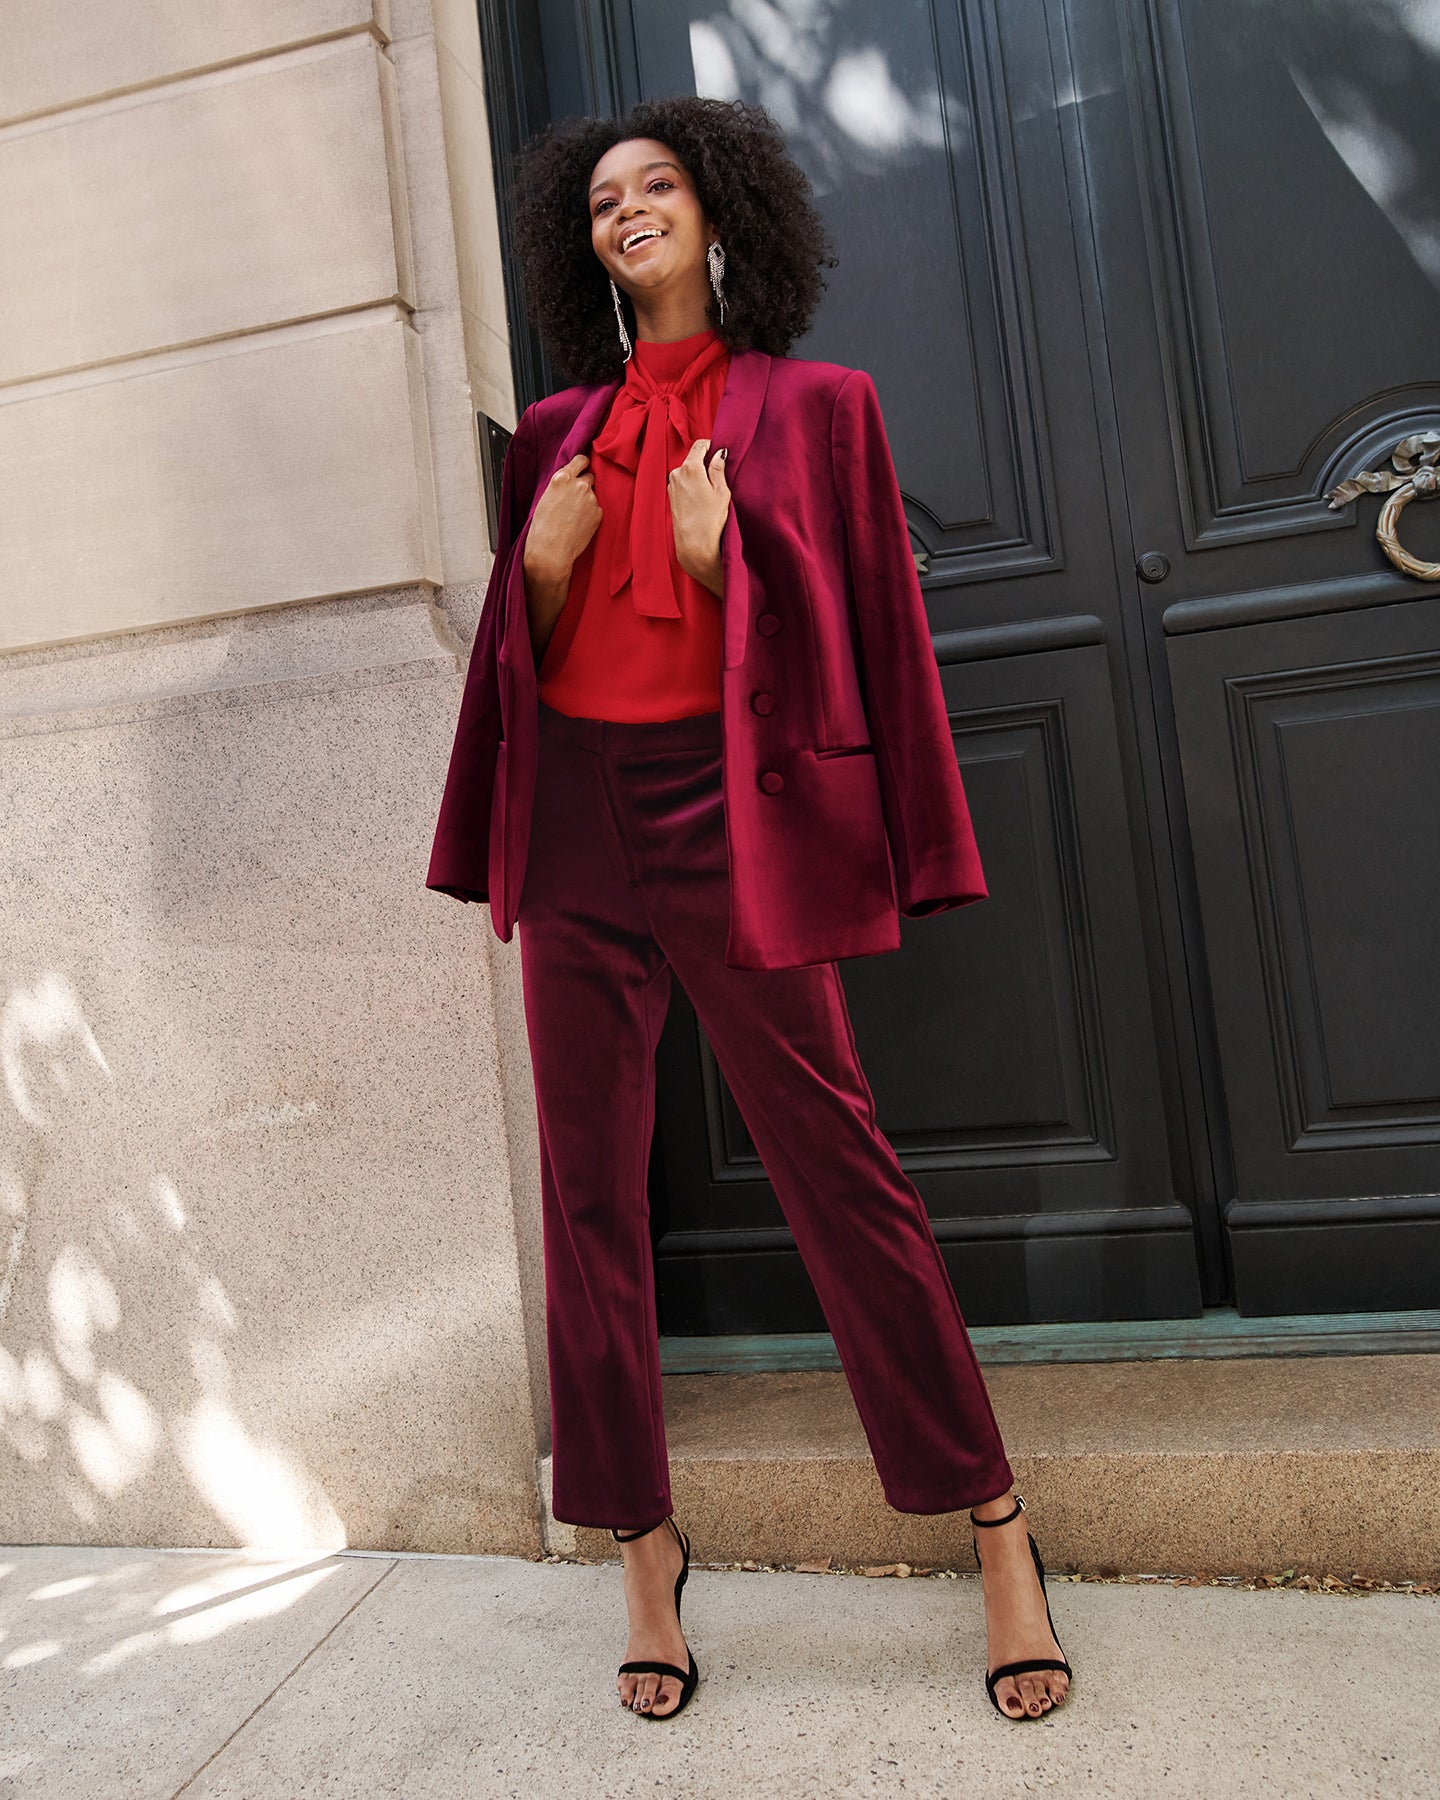 Woman wearing maroon velvet blazer, maroon velvet pants, red top with tie around neck, and black strappy open-toed shoes